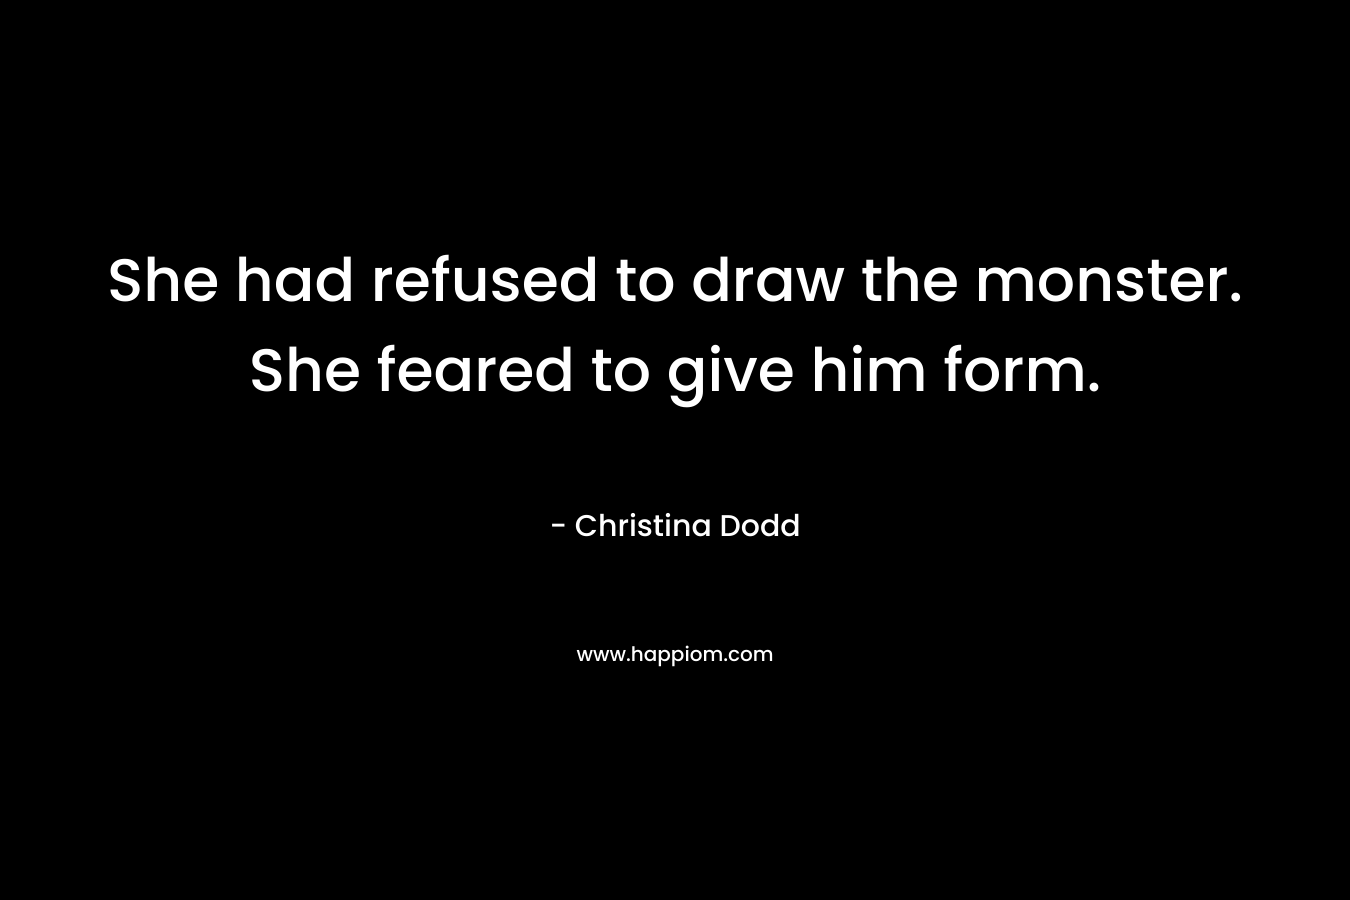 She had refused to draw the monster. She feared to give him form. – Christina Dodd